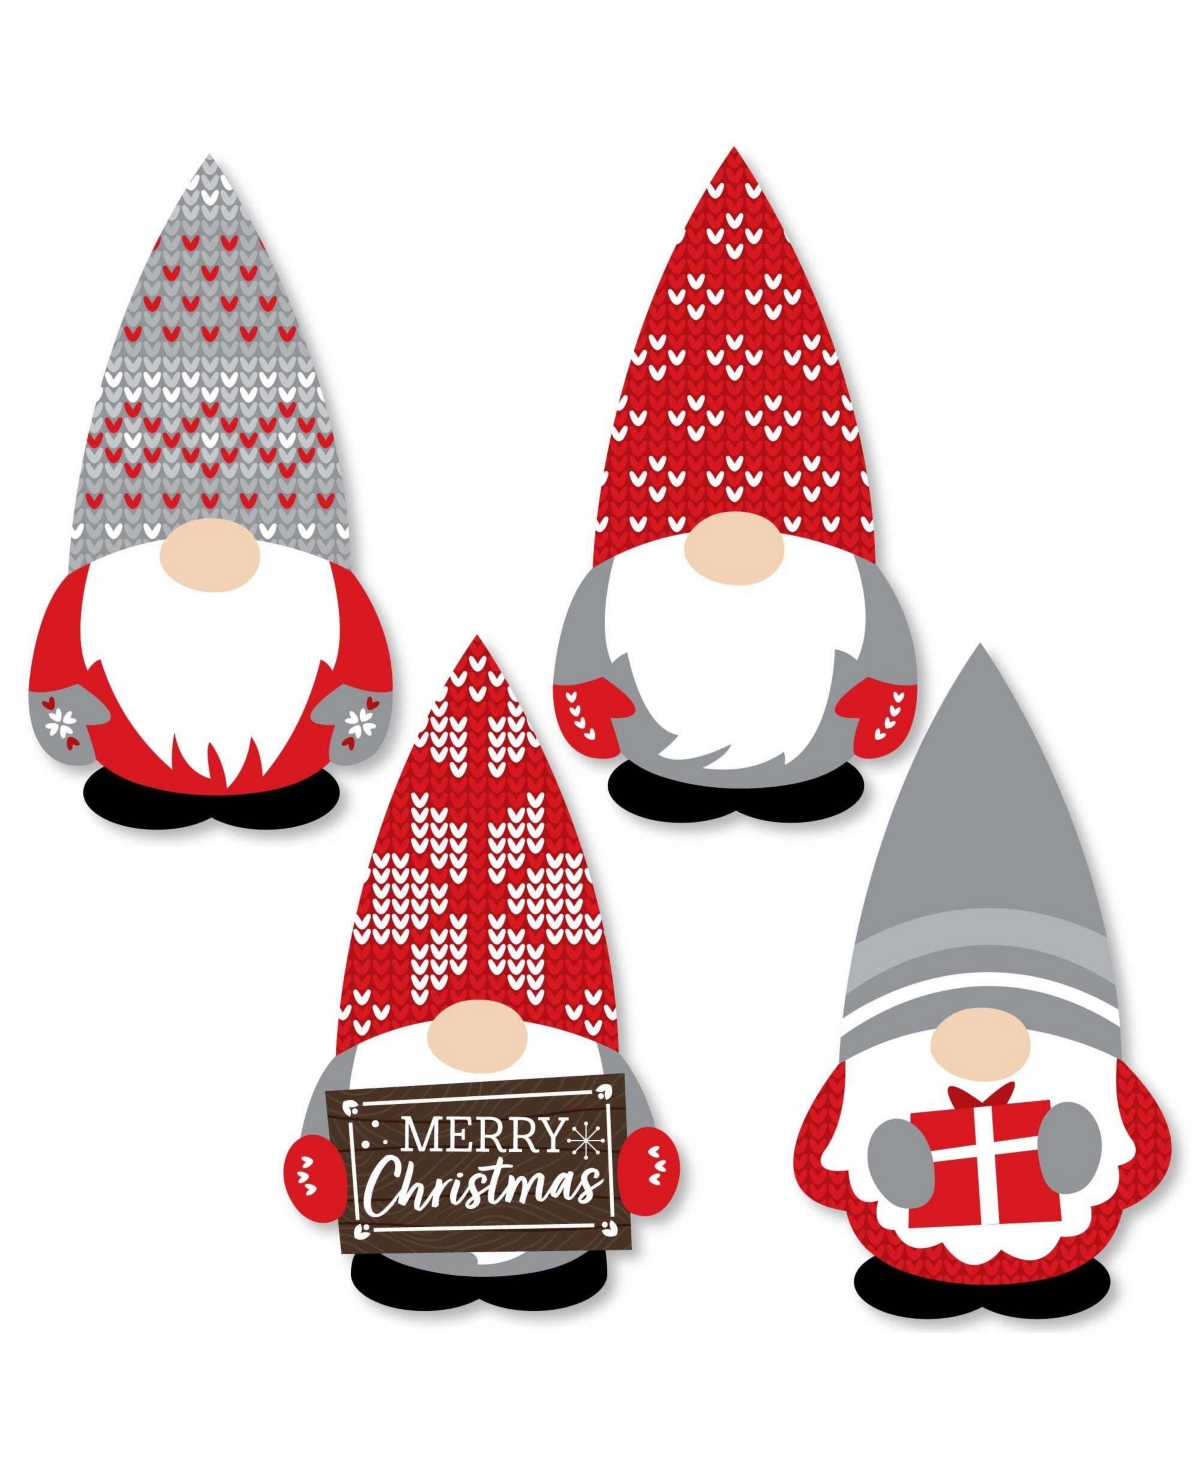 Christmas Gnomes - Diy Shaped Holiday Party Cut-Outs - 24 Ct